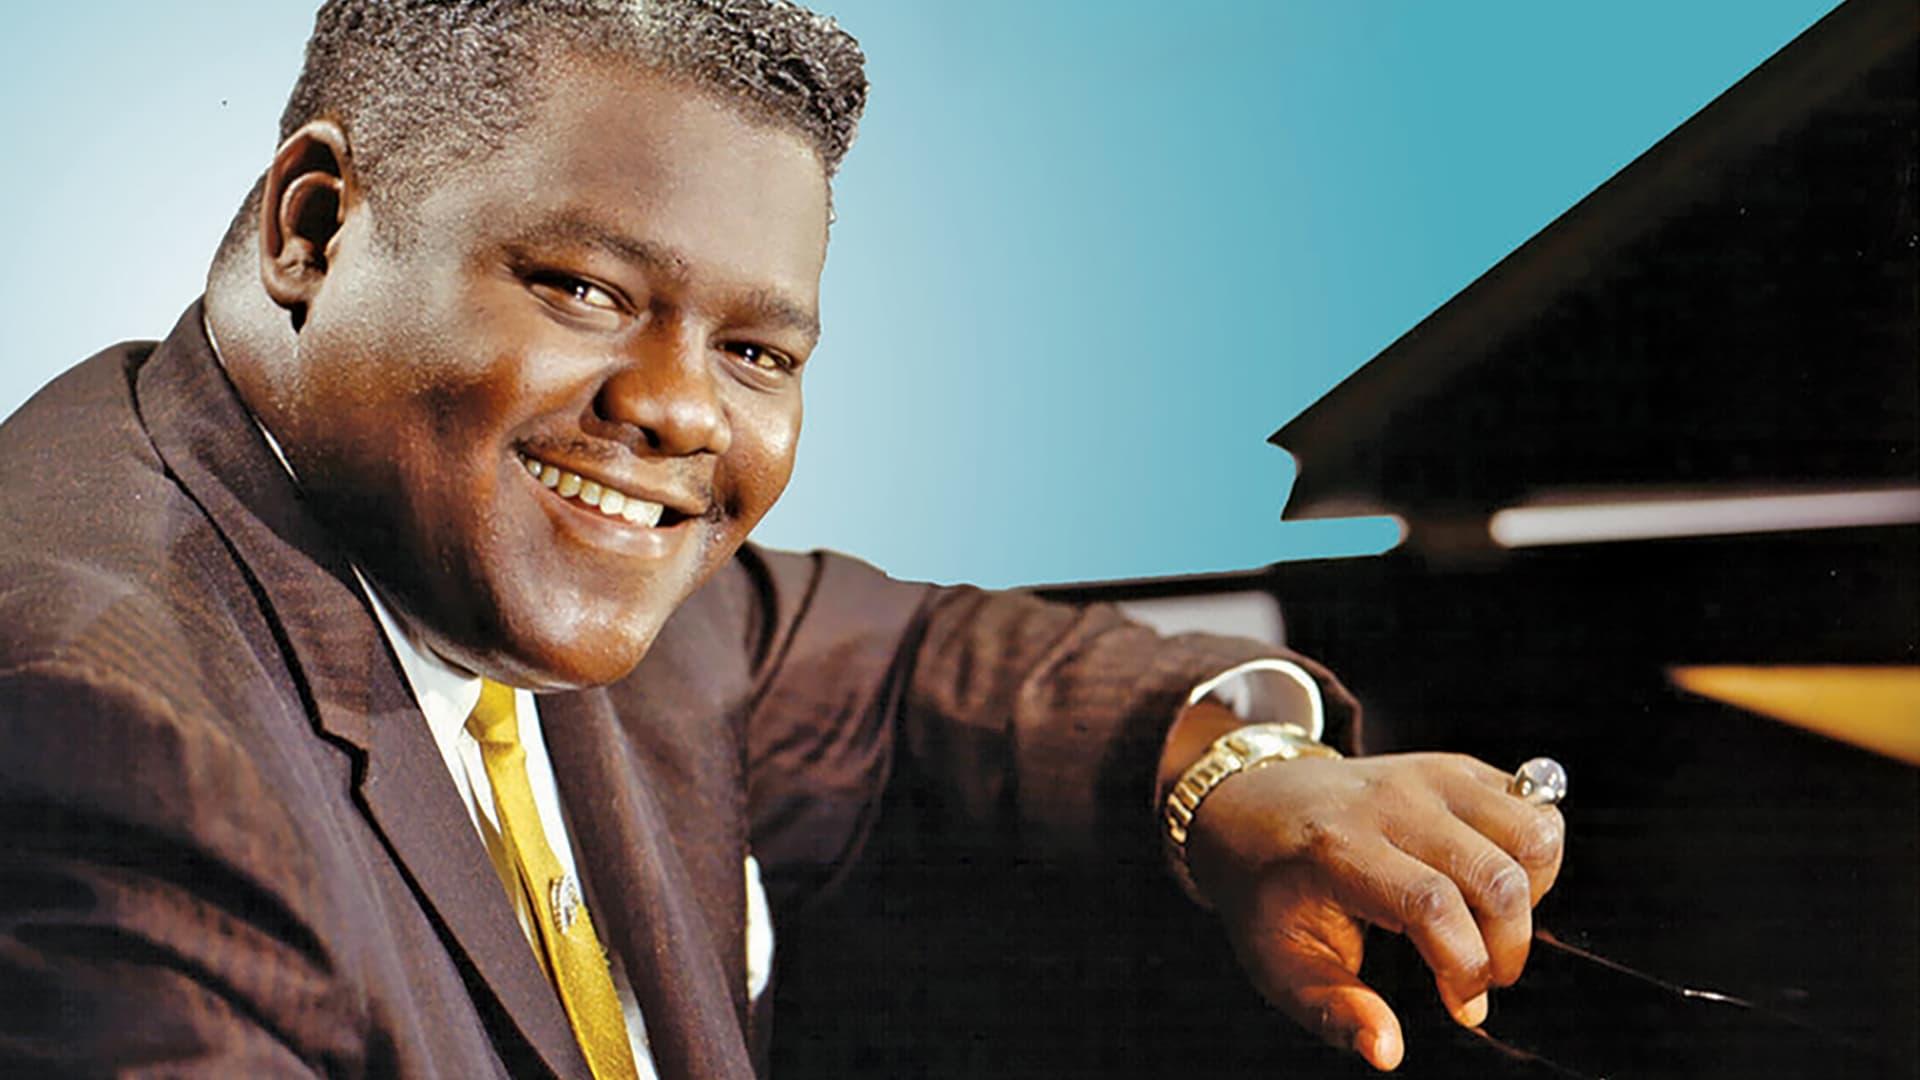 Fats Domino and The Birth of Rock ‘n’ Roll backdrop